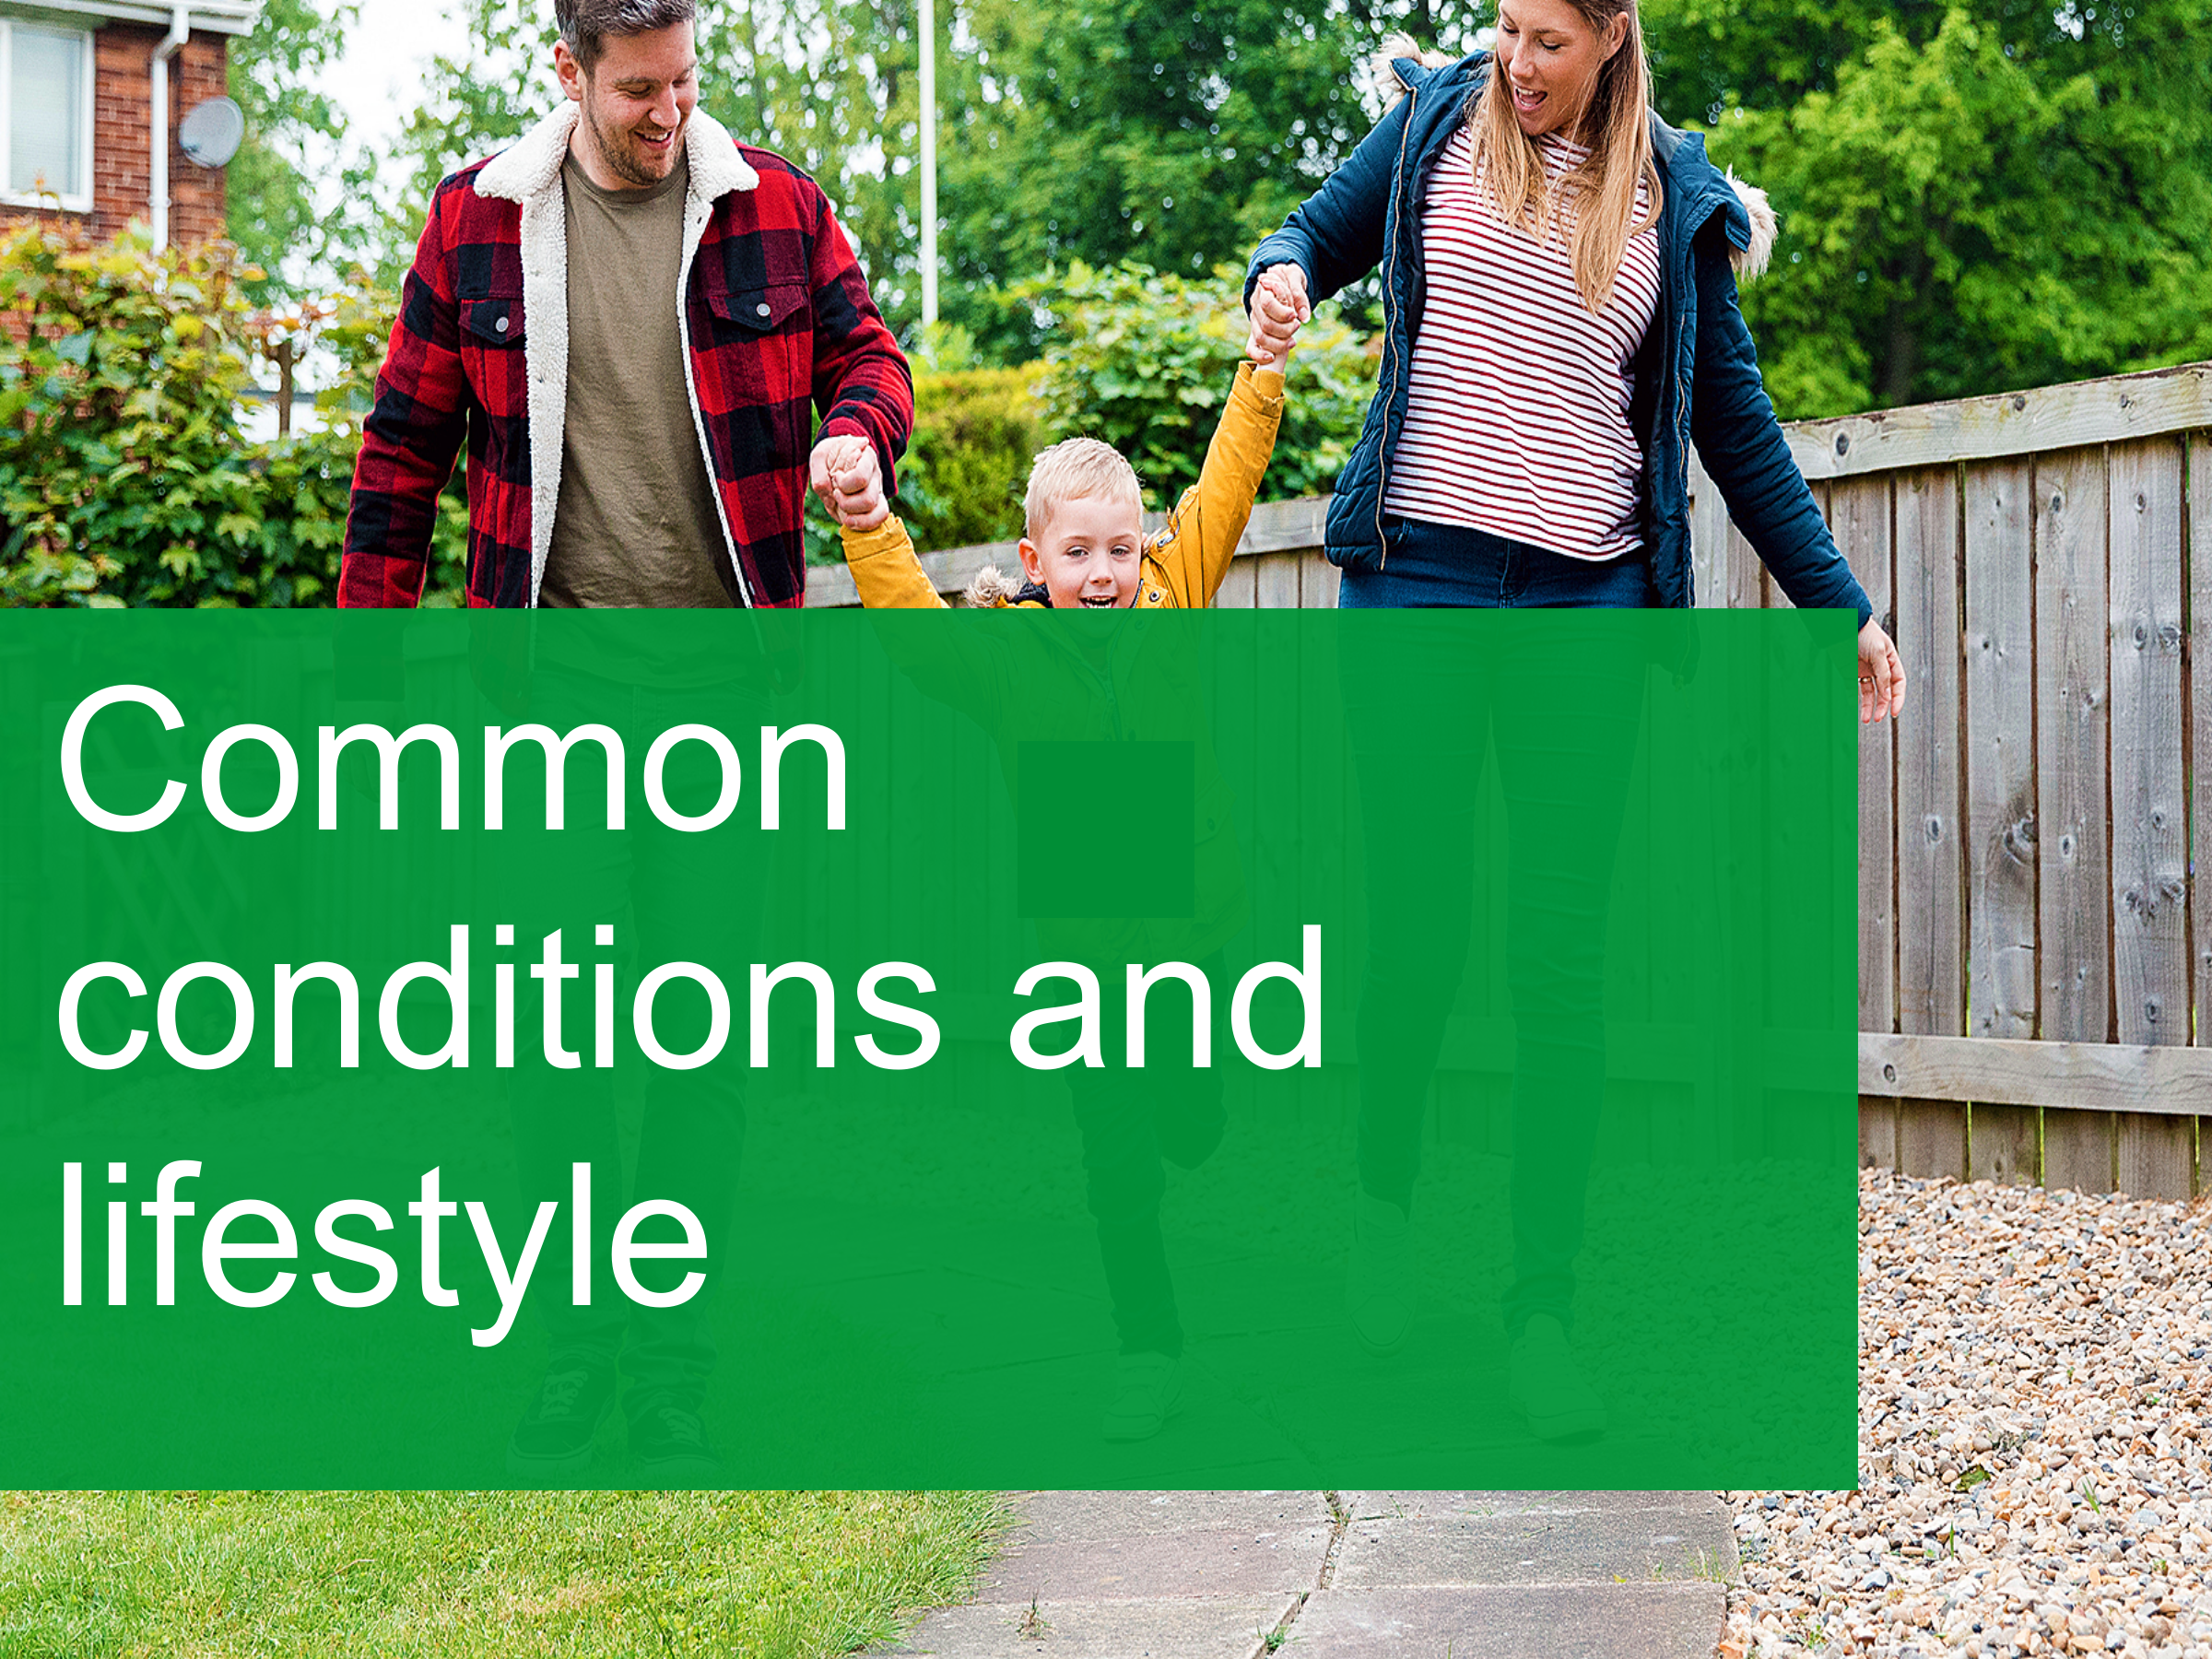 Common conditions and lifestyles